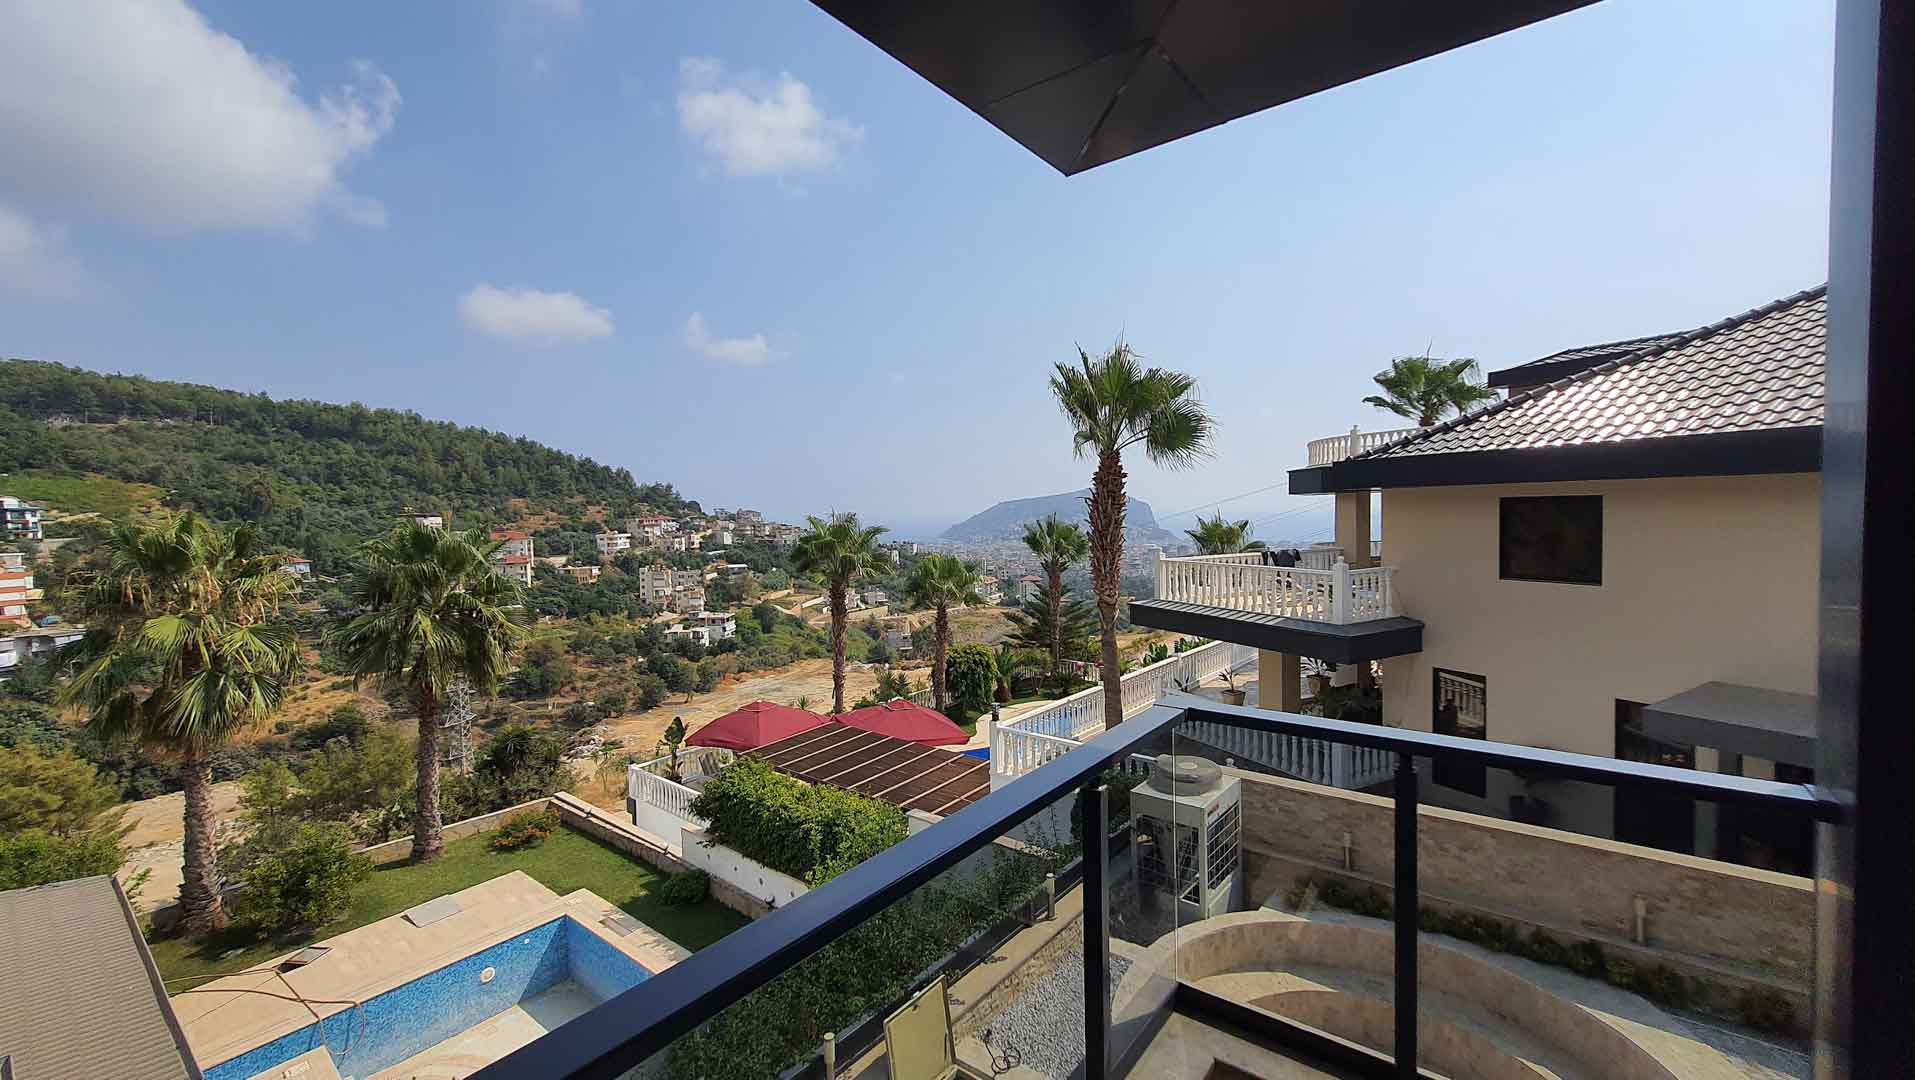 id1033-villa-11-with-vip-infrastructure-and-a-view-of-the-alanya-fortress (26)